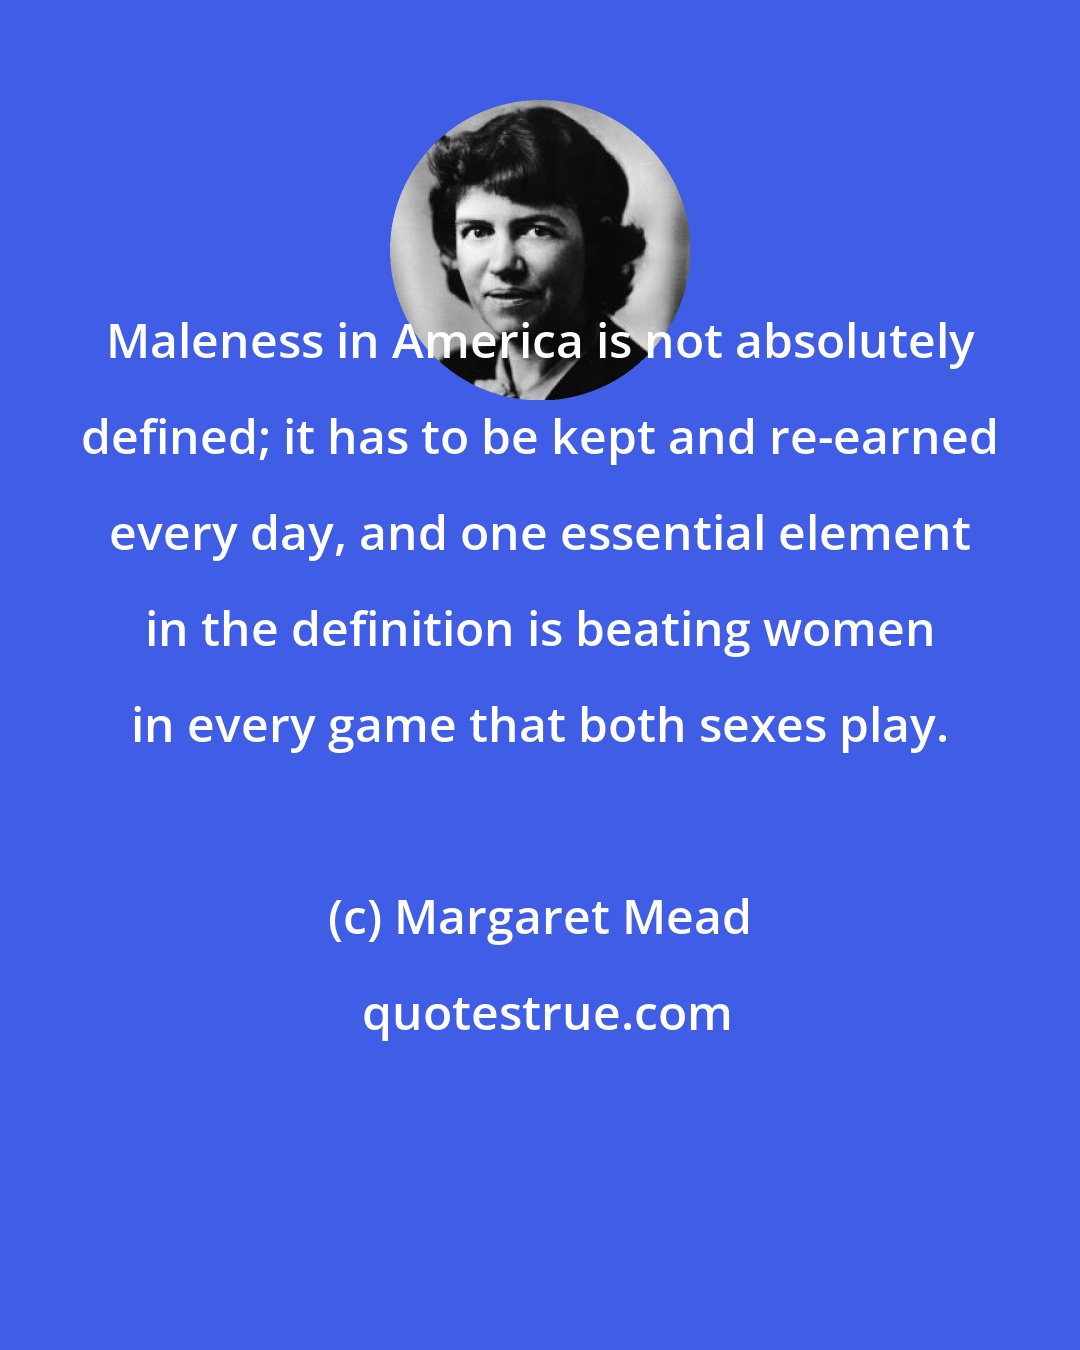 Margaret Mead: Maleness in America is not absolutely defined; it has to be kept and re-earned every day, and one essential element in the definition is beating women in every game that both sexes play.